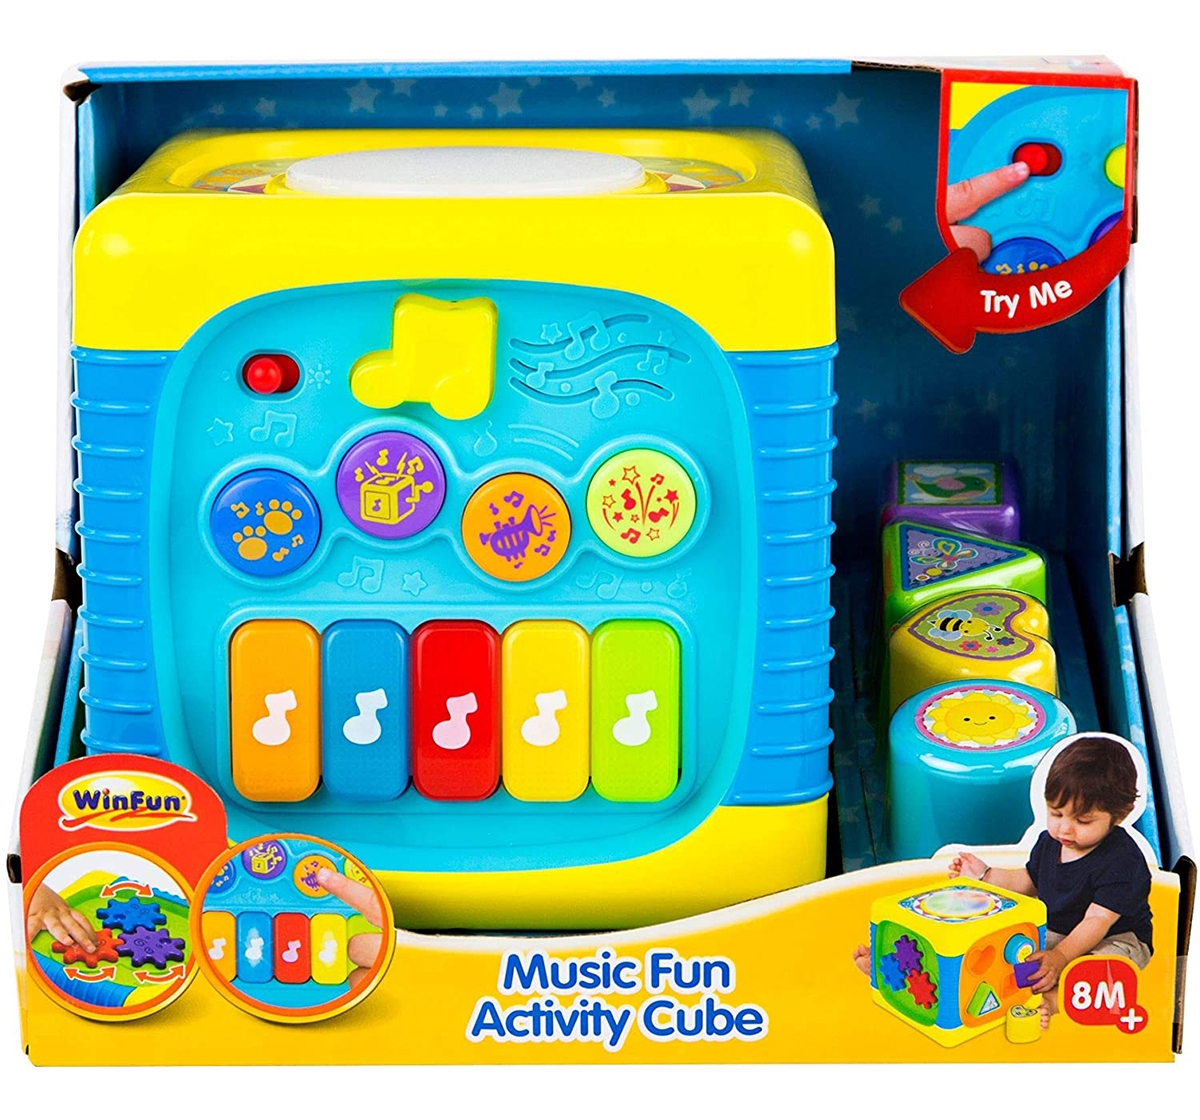 WinFun | Winfun - Music Fun Activity Cube Learning Toys for Kids age 8M+ 